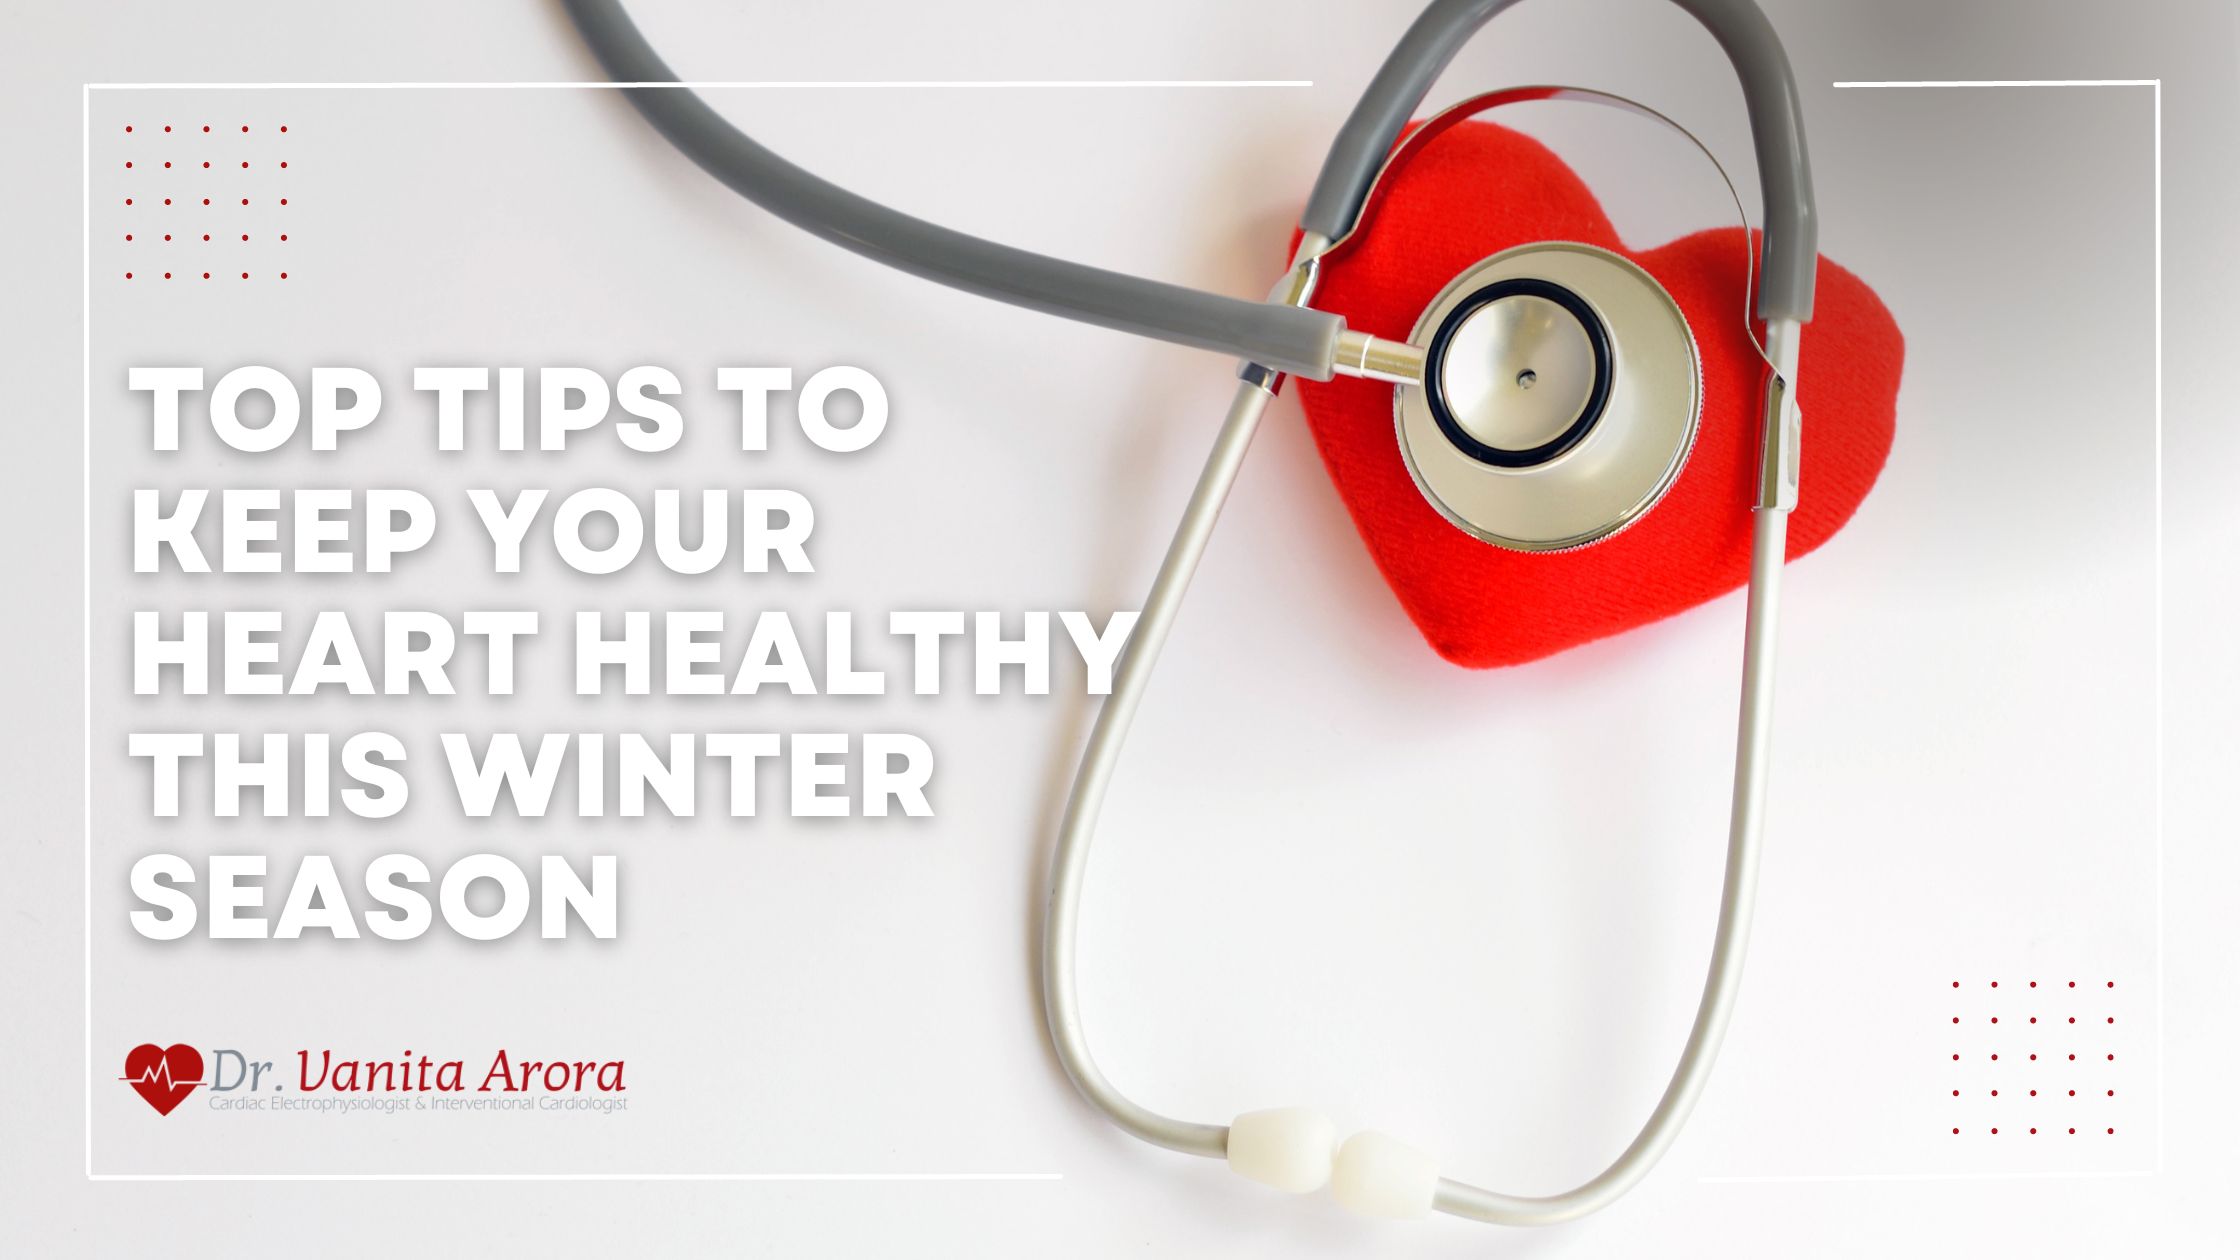 Top tips to keep your heart healthy this winter season